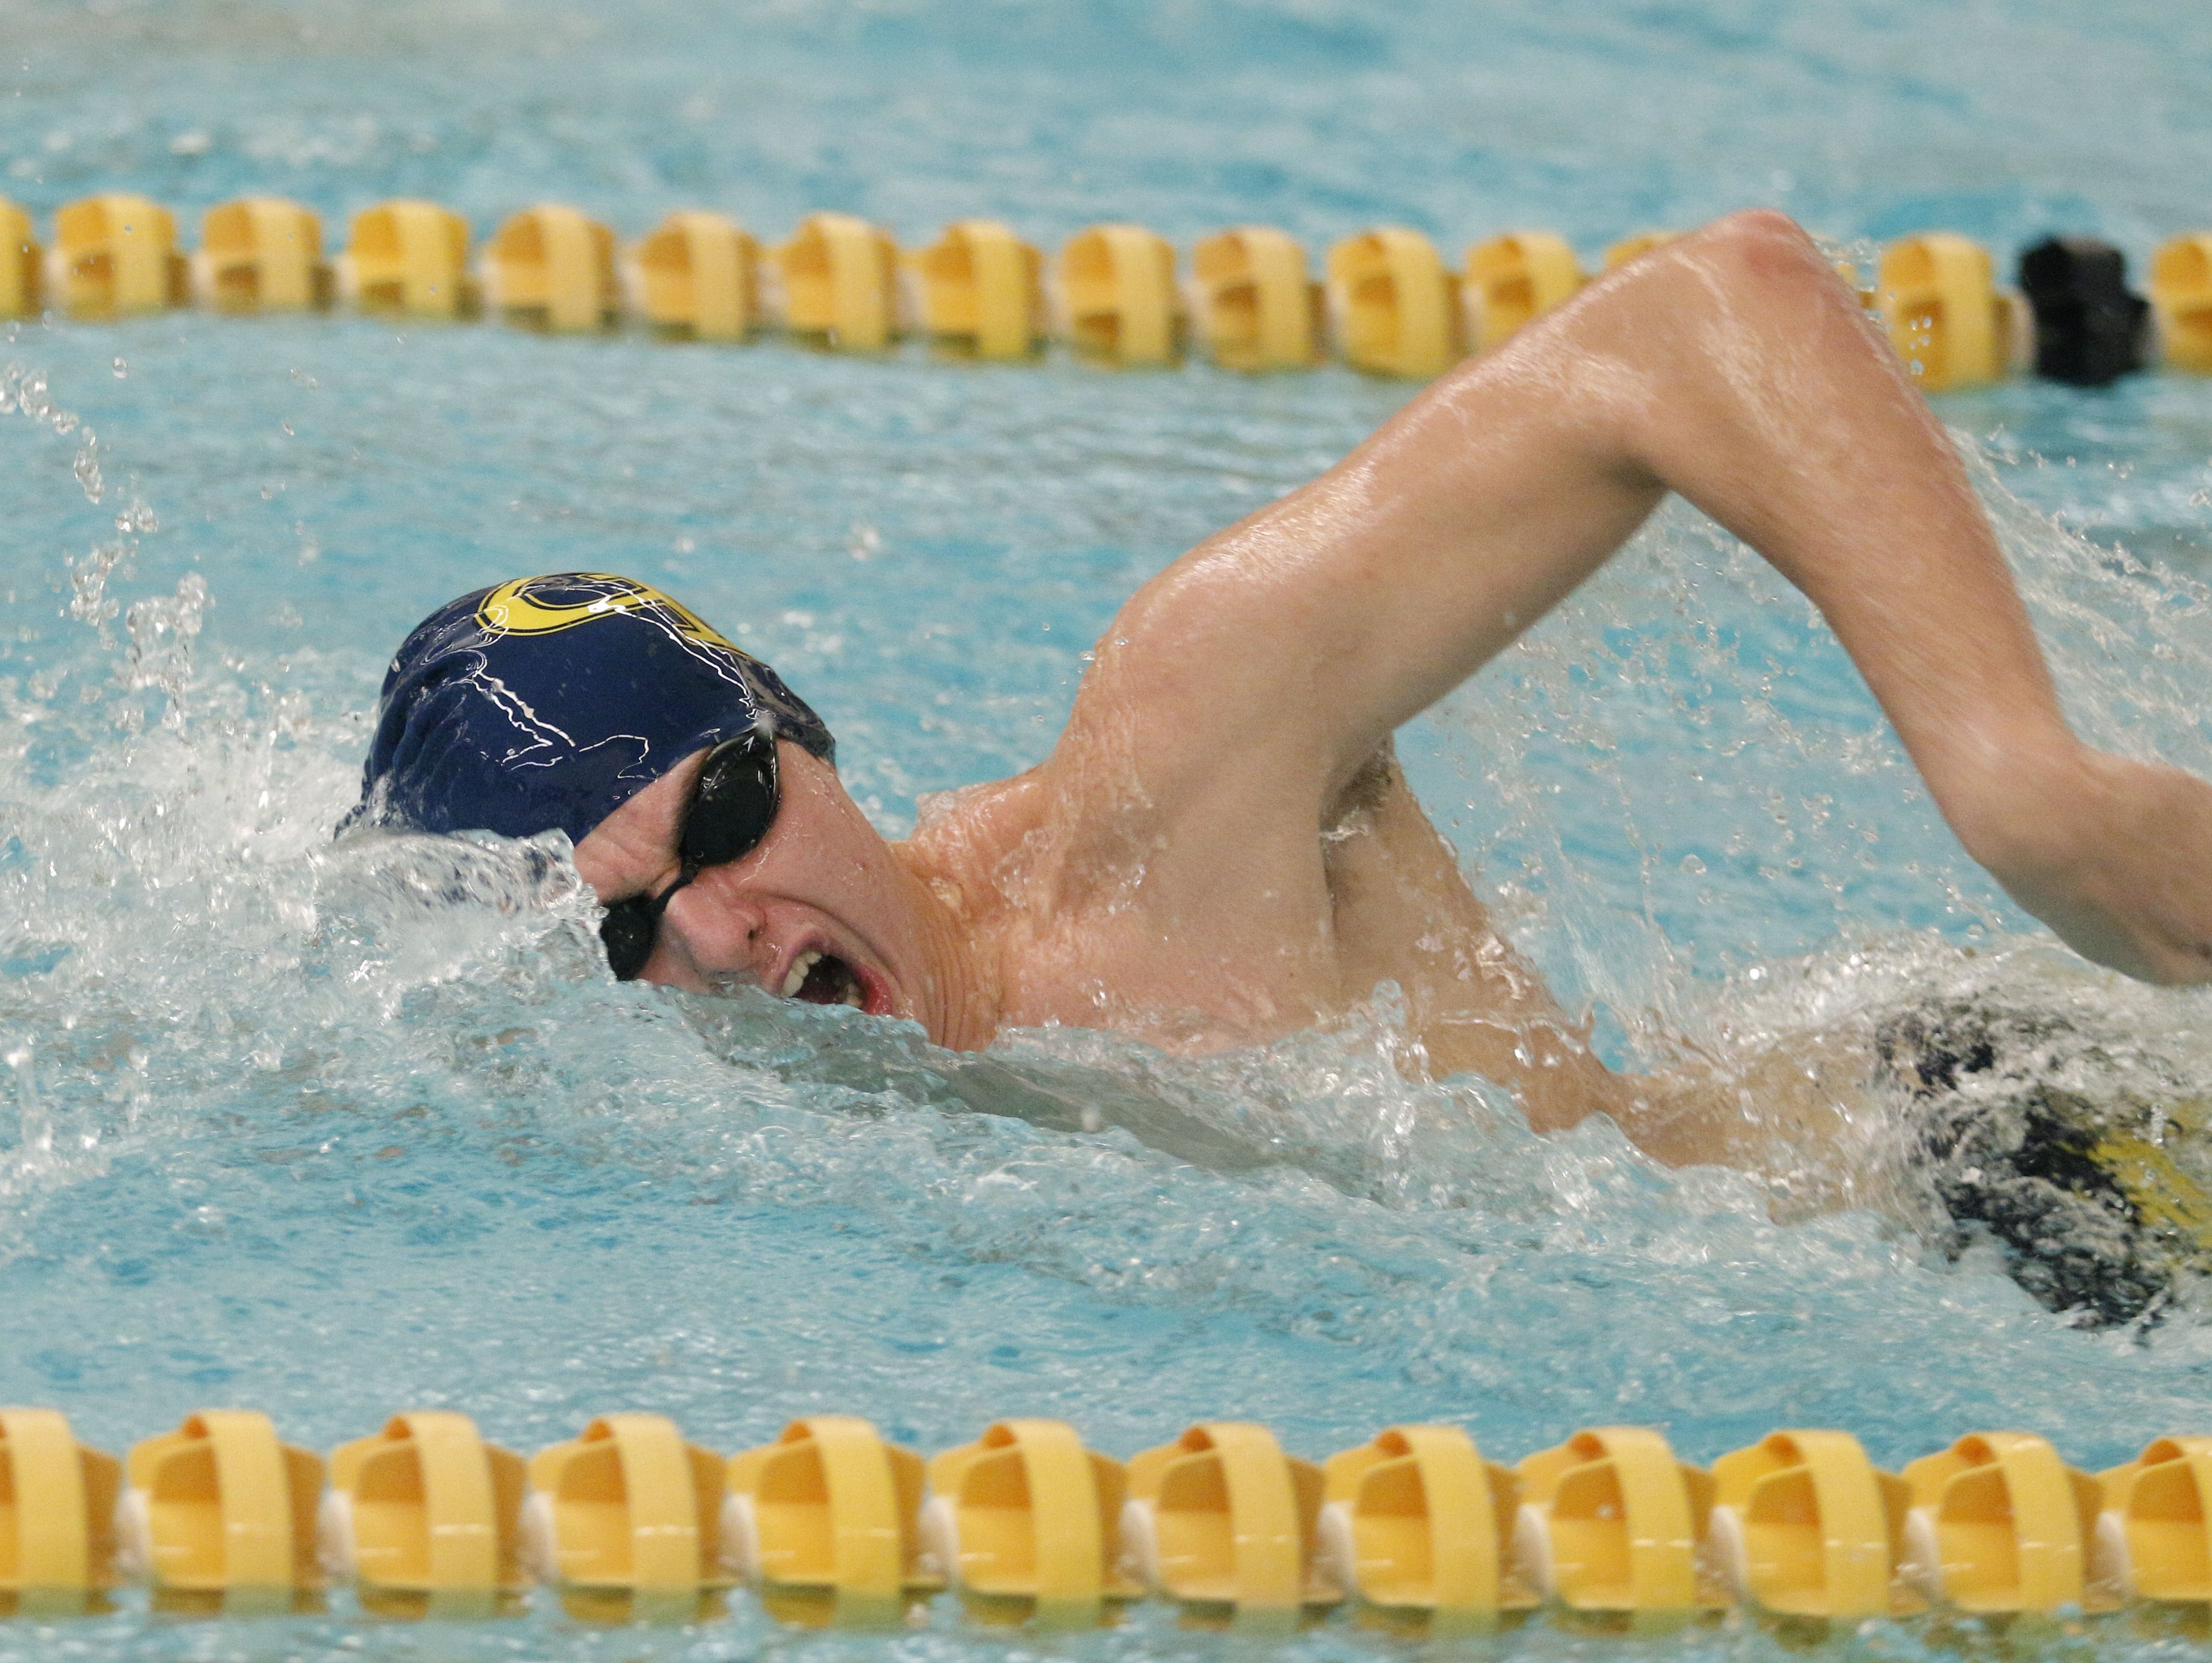 A Grand Ledge swimmer competes in the Waverly Relays Wednesday, Dec. 7, 2016, at Waverly High School.